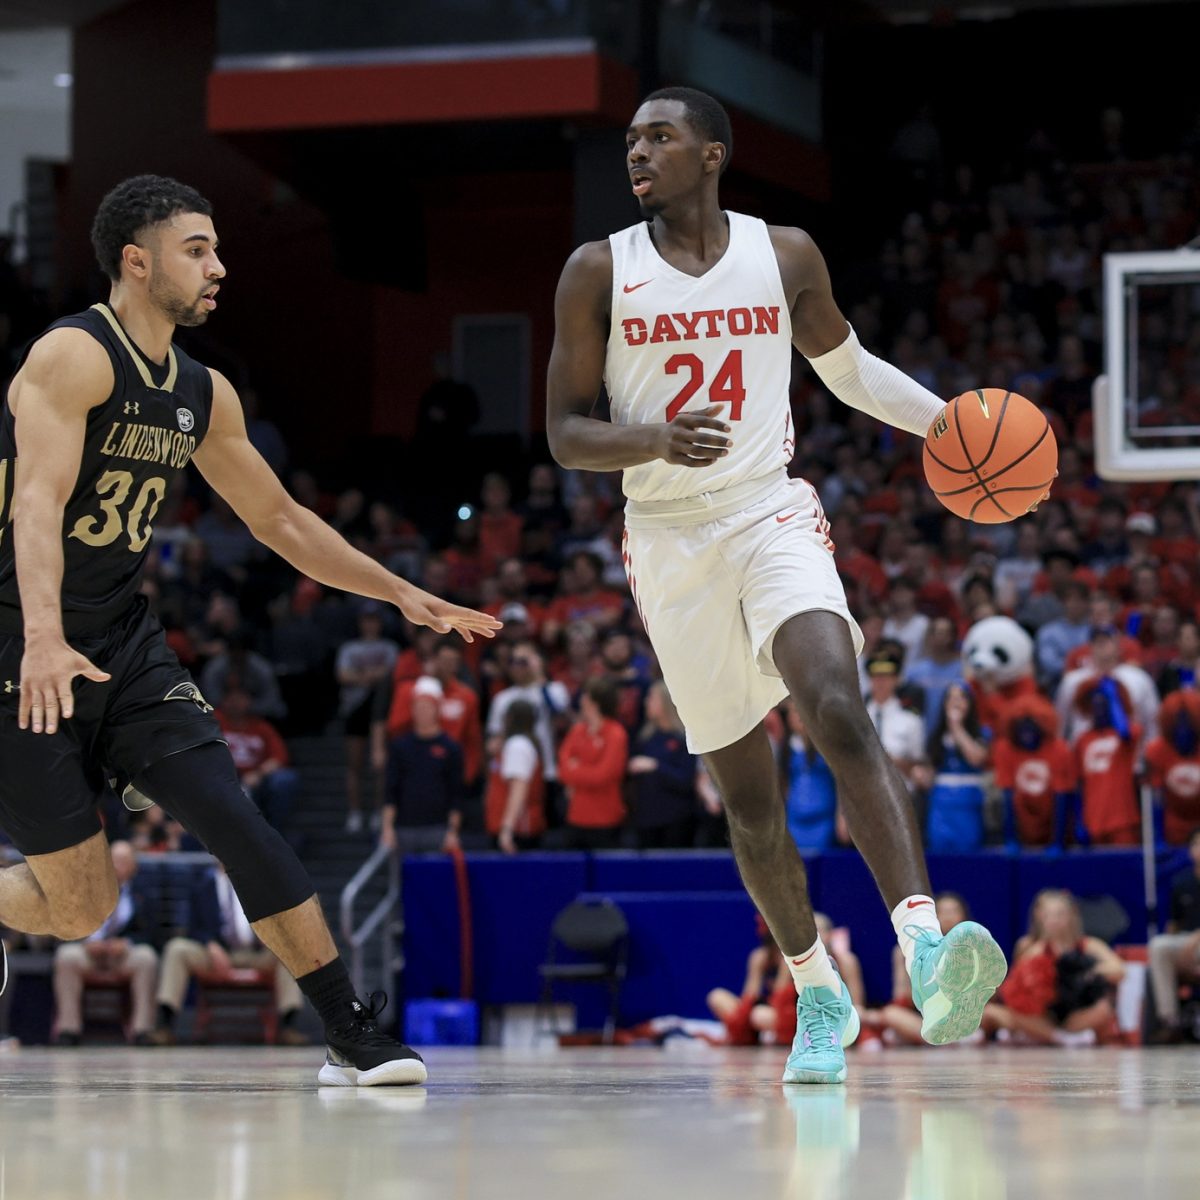 NC State vs. Dayton Prediction, Preview, and Odds - 11-24-2022